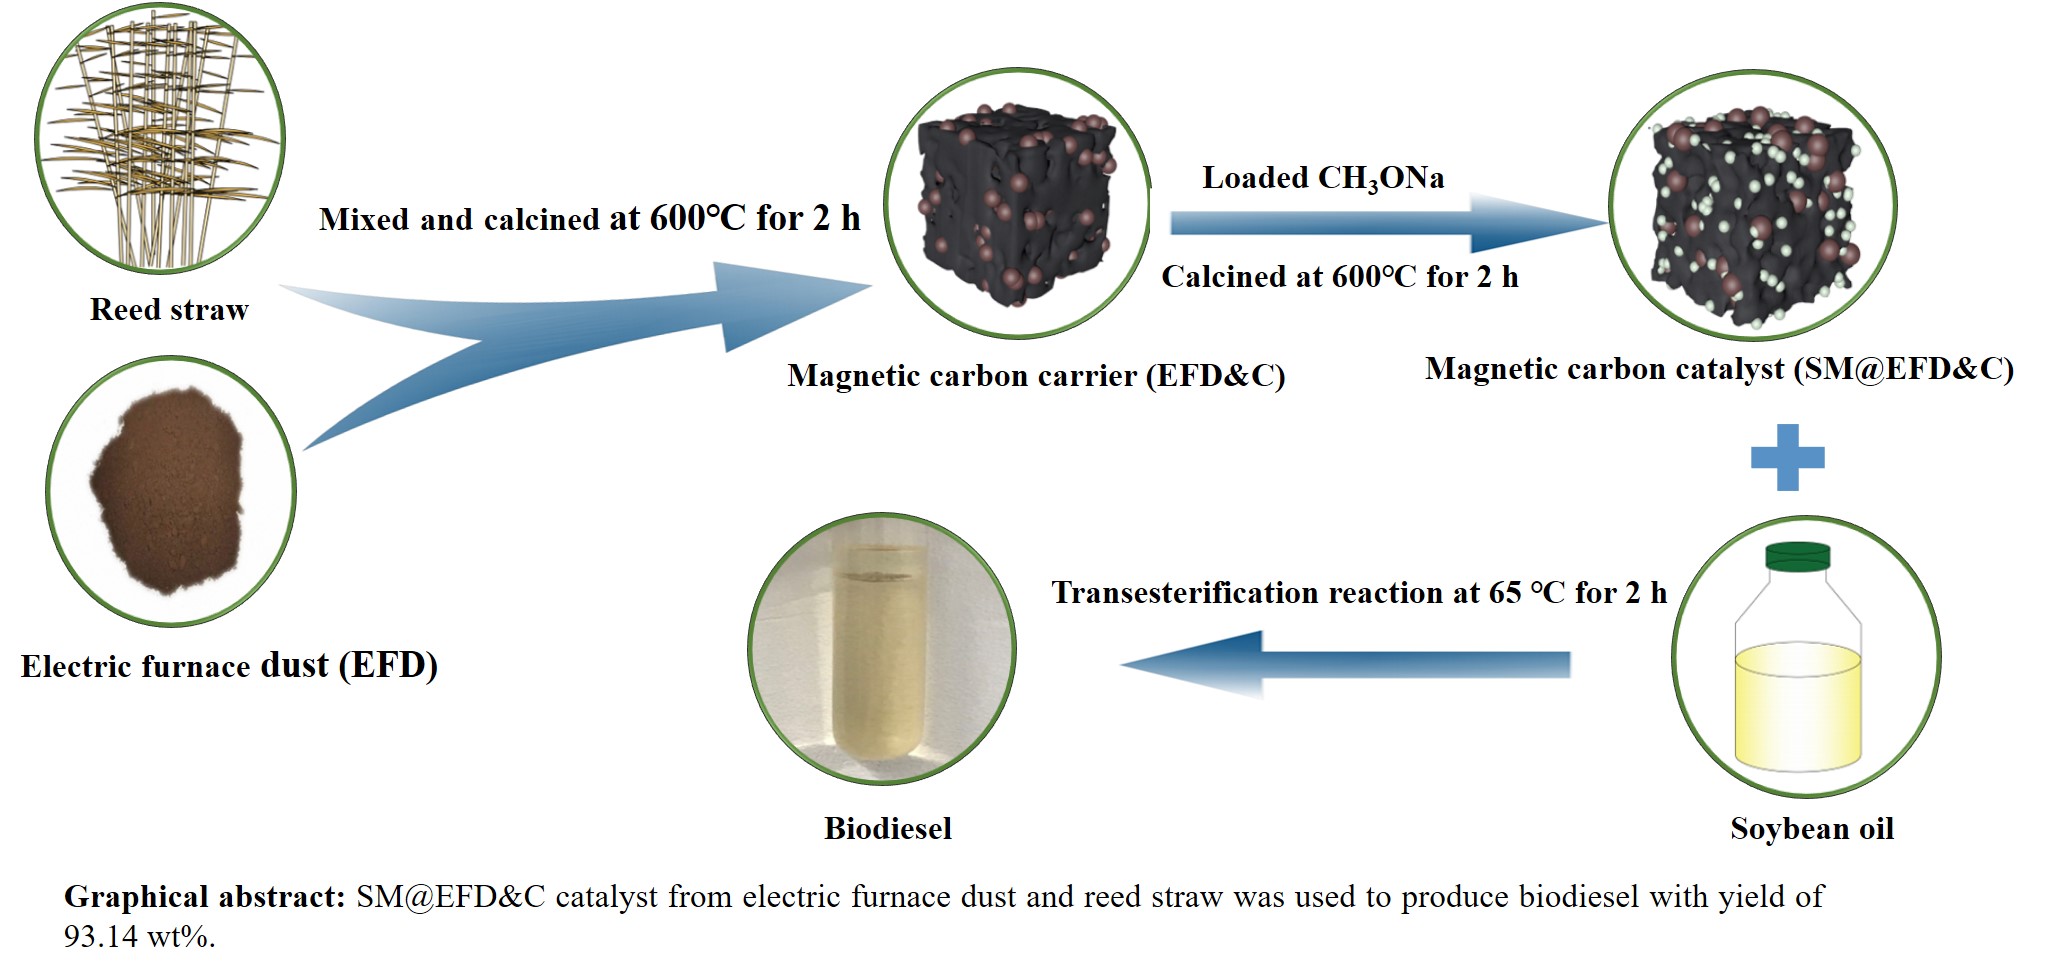 A Novel Magnetic Carbon Based Catalyst Synthesized from Reed Straw and Electric Furnace Dust for Biodiesel Production